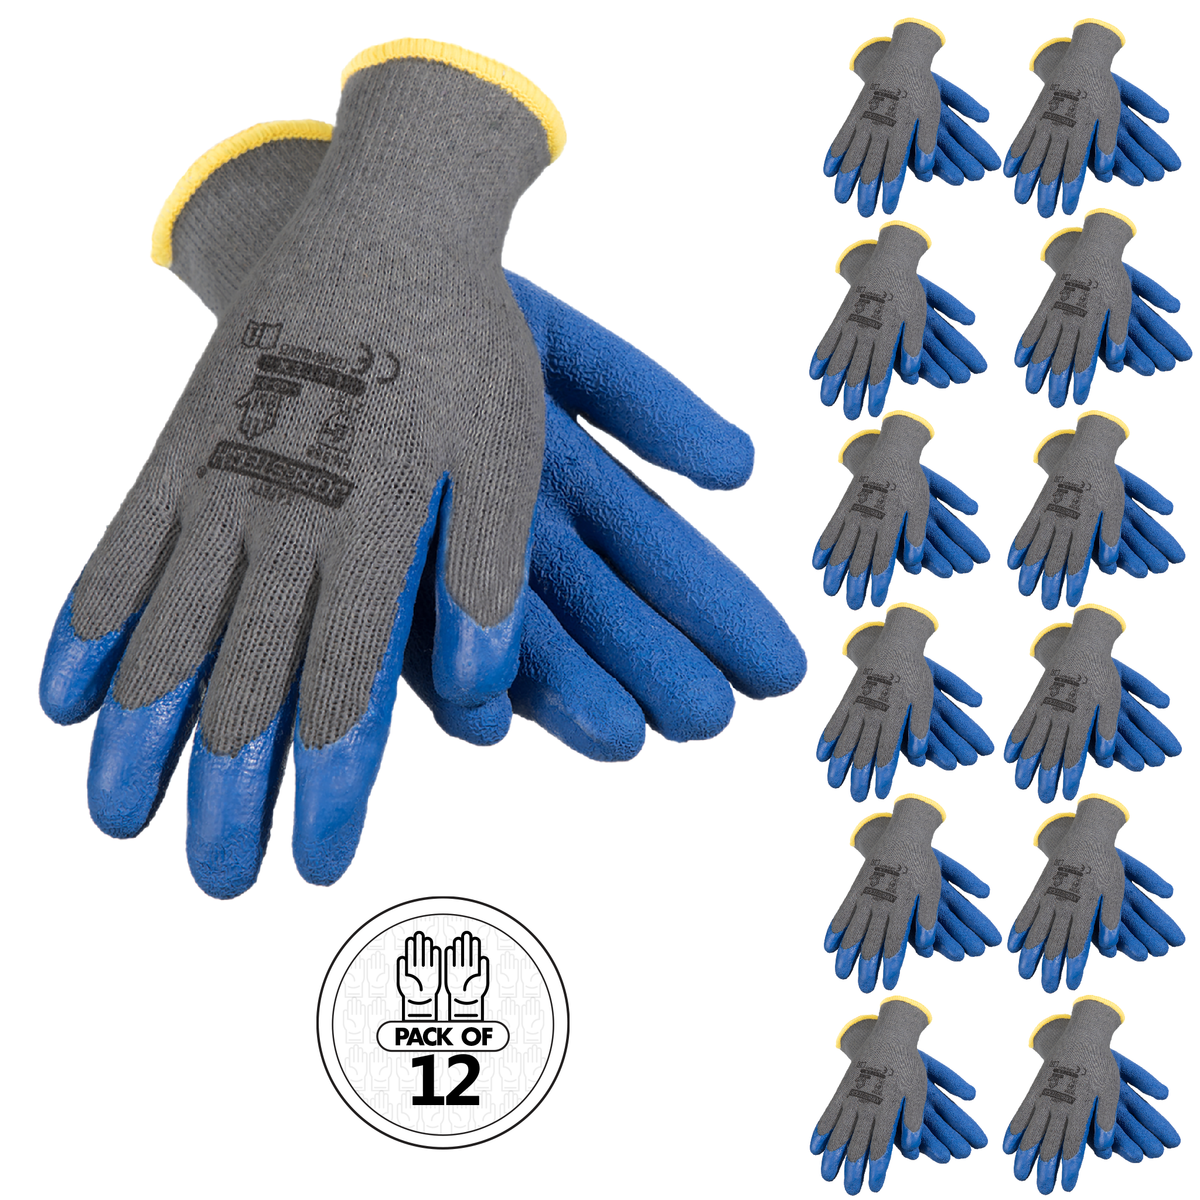 COOLJOB Rubber Coated Safety Work Gloves Non-Slip Multipack Large ( 60 Pairs) / Same Pairs of Each Color